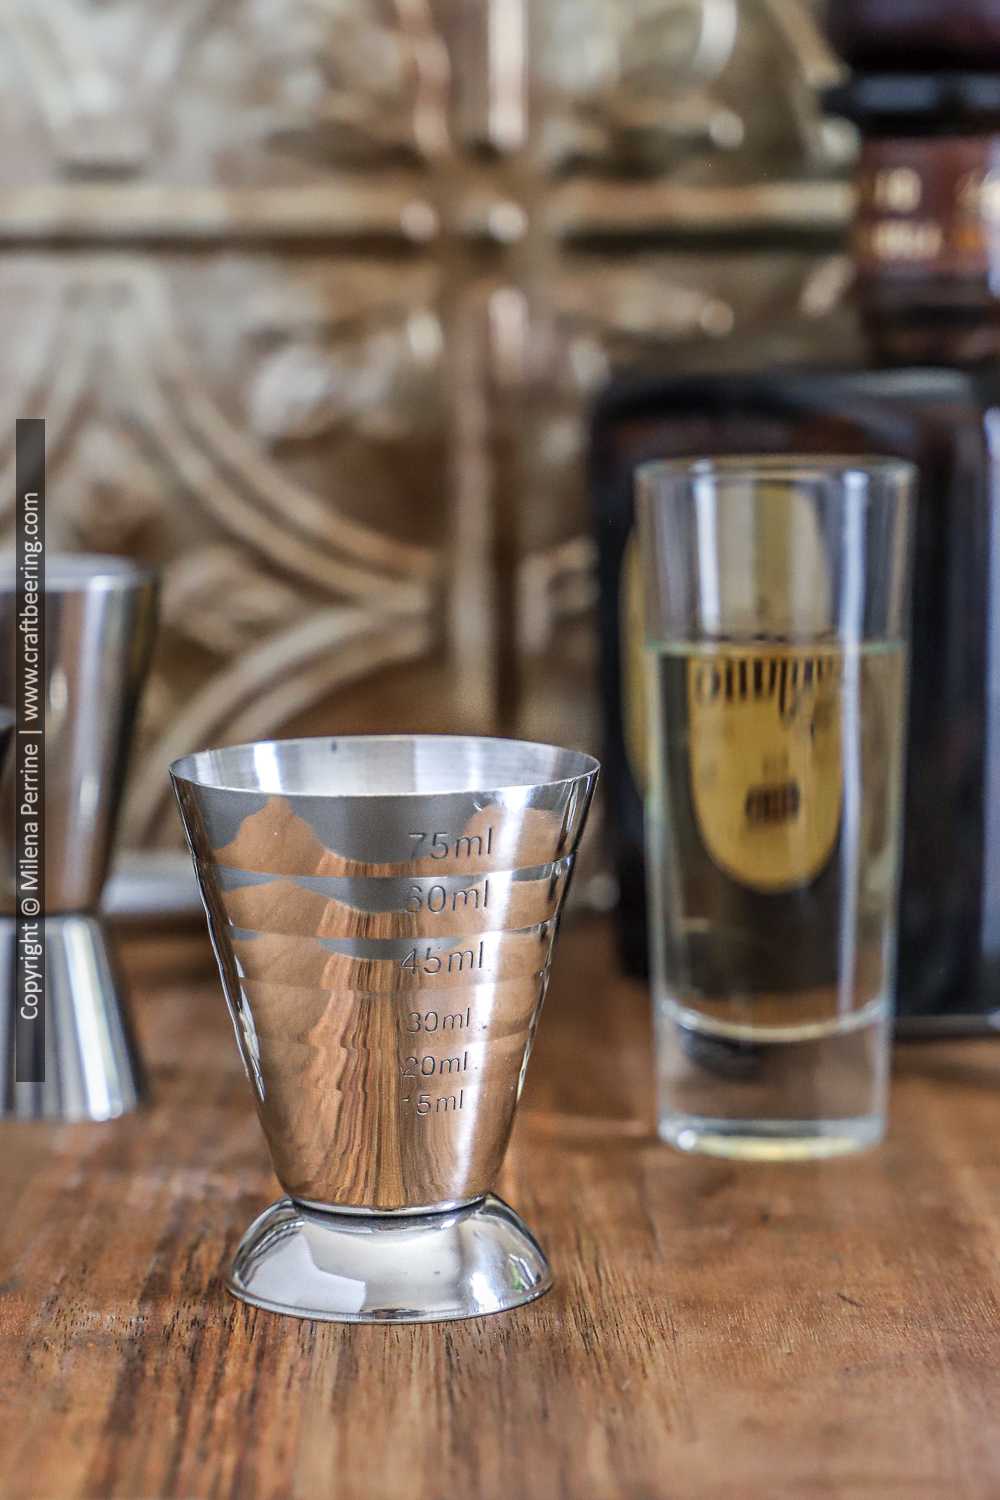 How Many Ml in a Shot Glass? - Craft Beering